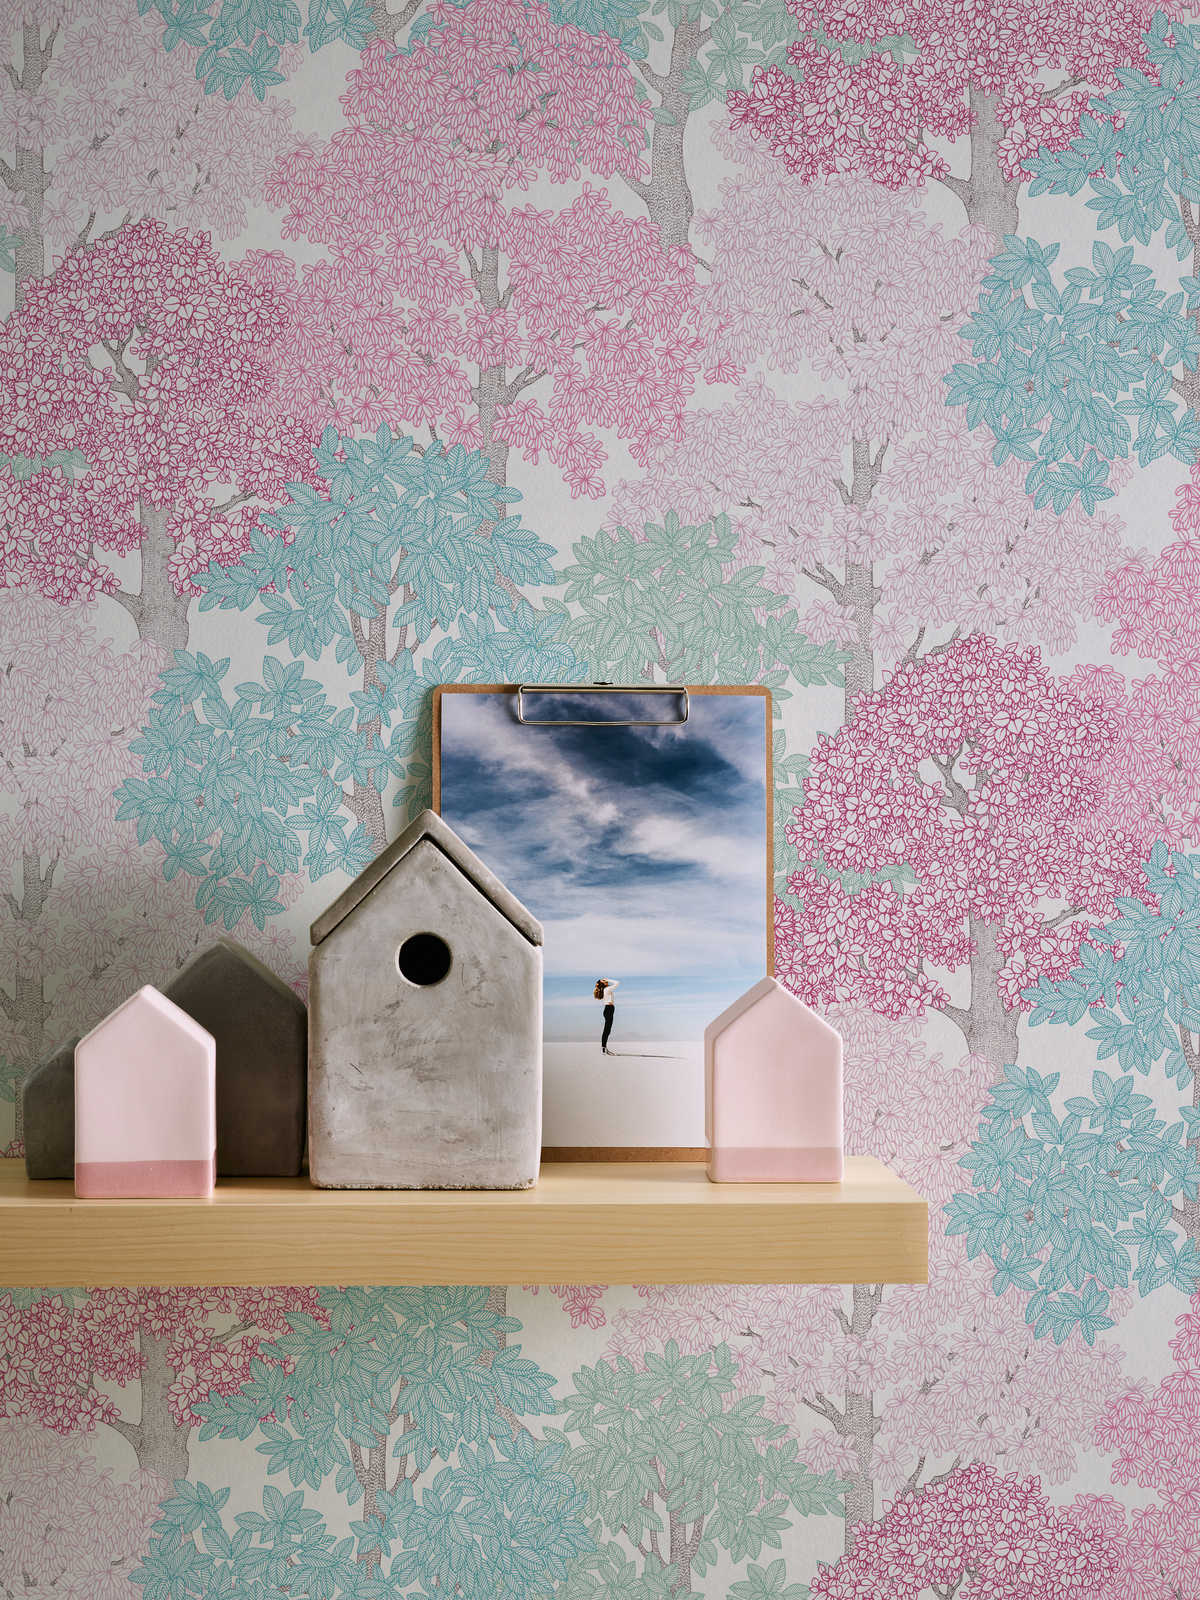             Wallpaper forest design in drawing style with treetops - pink, blue, white
        